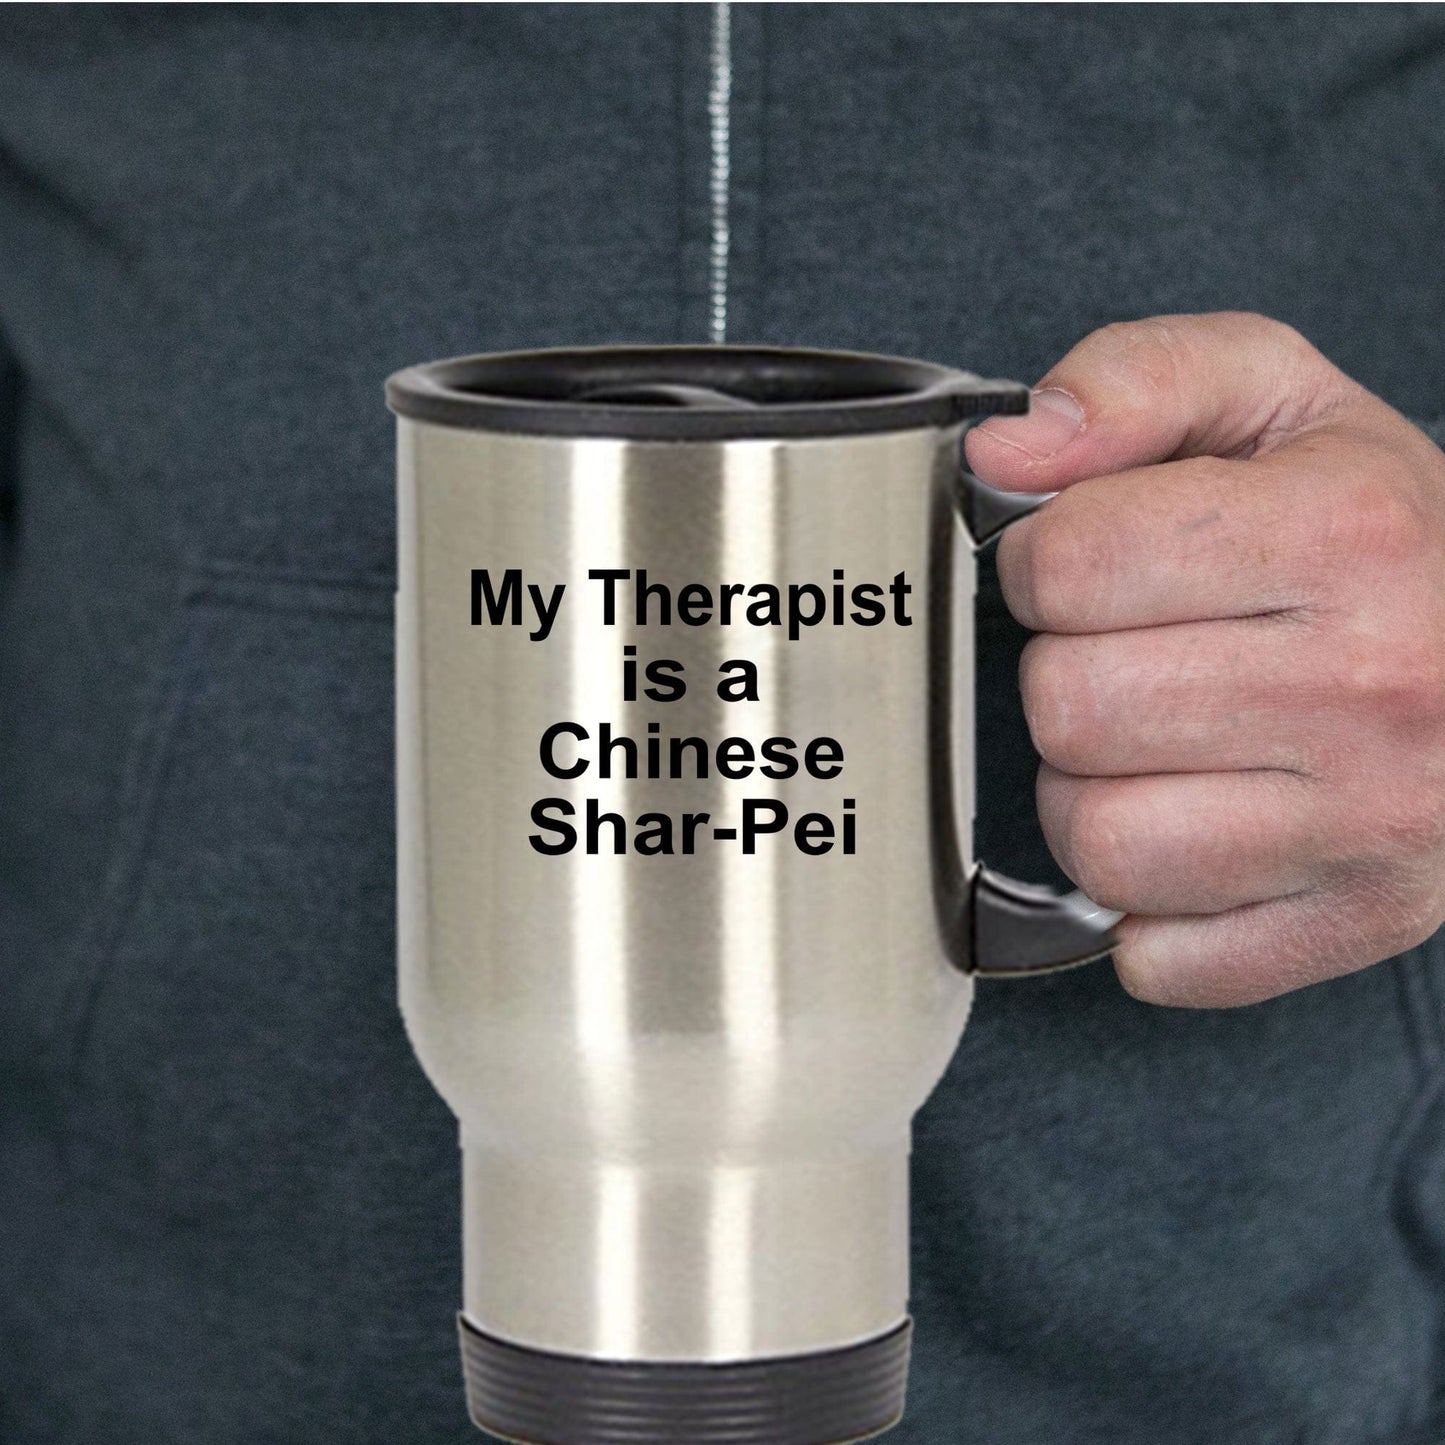 Chinese Crested Dog Lover Owner Funny Gift Therapist Stainless Steel Insulated Travel Coffee Mug